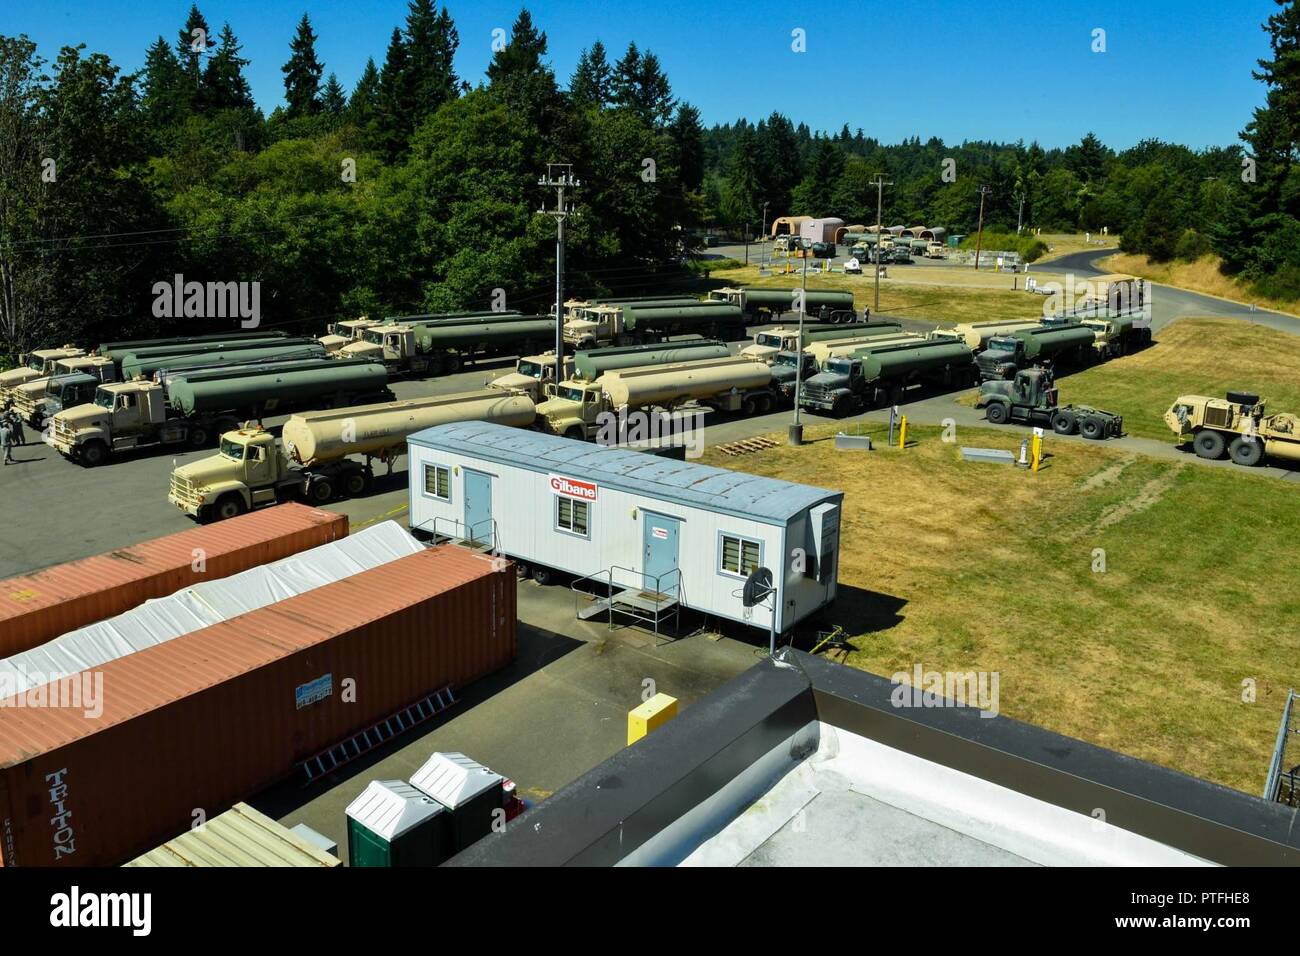 MANCHESTER, Wash. (July 18, 2017) United States Army 475th Quartermaster Group fuel trucks are staged in an empty lot at Naval Supply Systems Command Fleet Logistics Center (NAVSUP FLC) Puget Sound’s Manchester Fuel Depot during the 2017 Quartermaster Liquid Logistics Exercise (QLLEX). QLLEX is an annual exercise for Army Reserve units to train for their wartime mission of providing petroleum and water to units throughout the continental United States. This year’s exercise had convoys of Army trucks based out of Joint Base Lewis-McCord (JBLM) transporting fuel provided by NAVSUP FLC Puget Soun Stock Photo